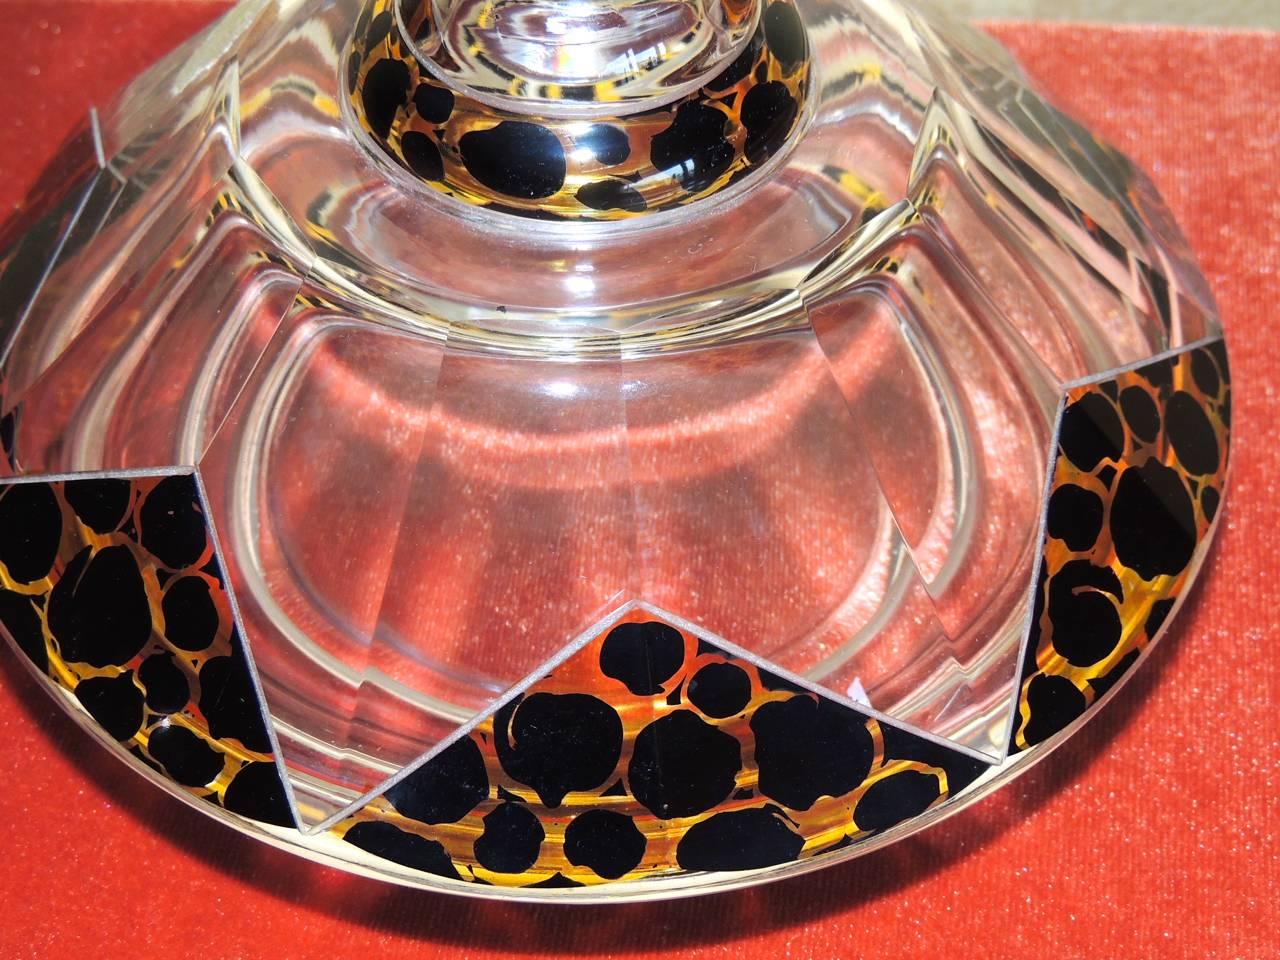 A most unique Czech Bohemian Art Deco glass decanter with a zig zag pattern embellished with a leopard like design in amber and black. The decanter is faceted, graceful and has an impressive stopper with the matching pattern.

We once heard